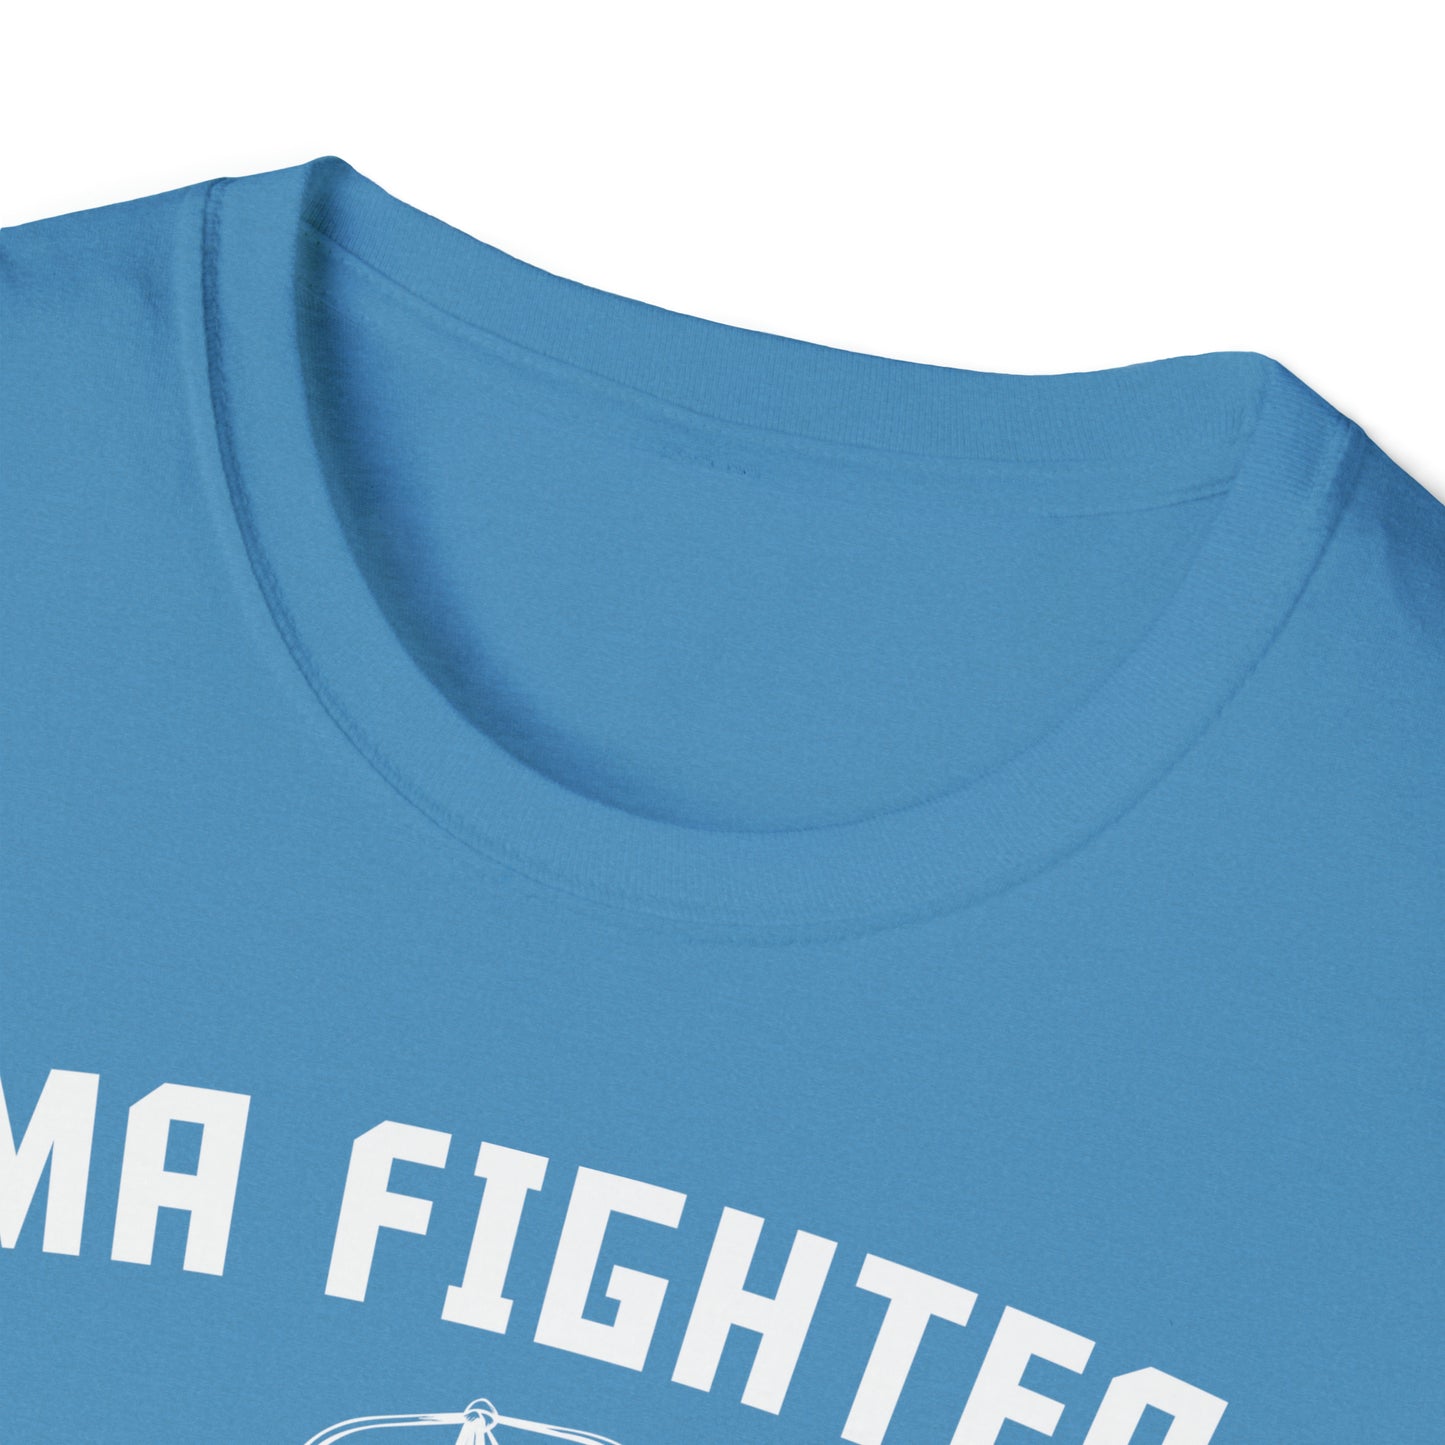 Fighter - Unisex Softstyle T-Shirt